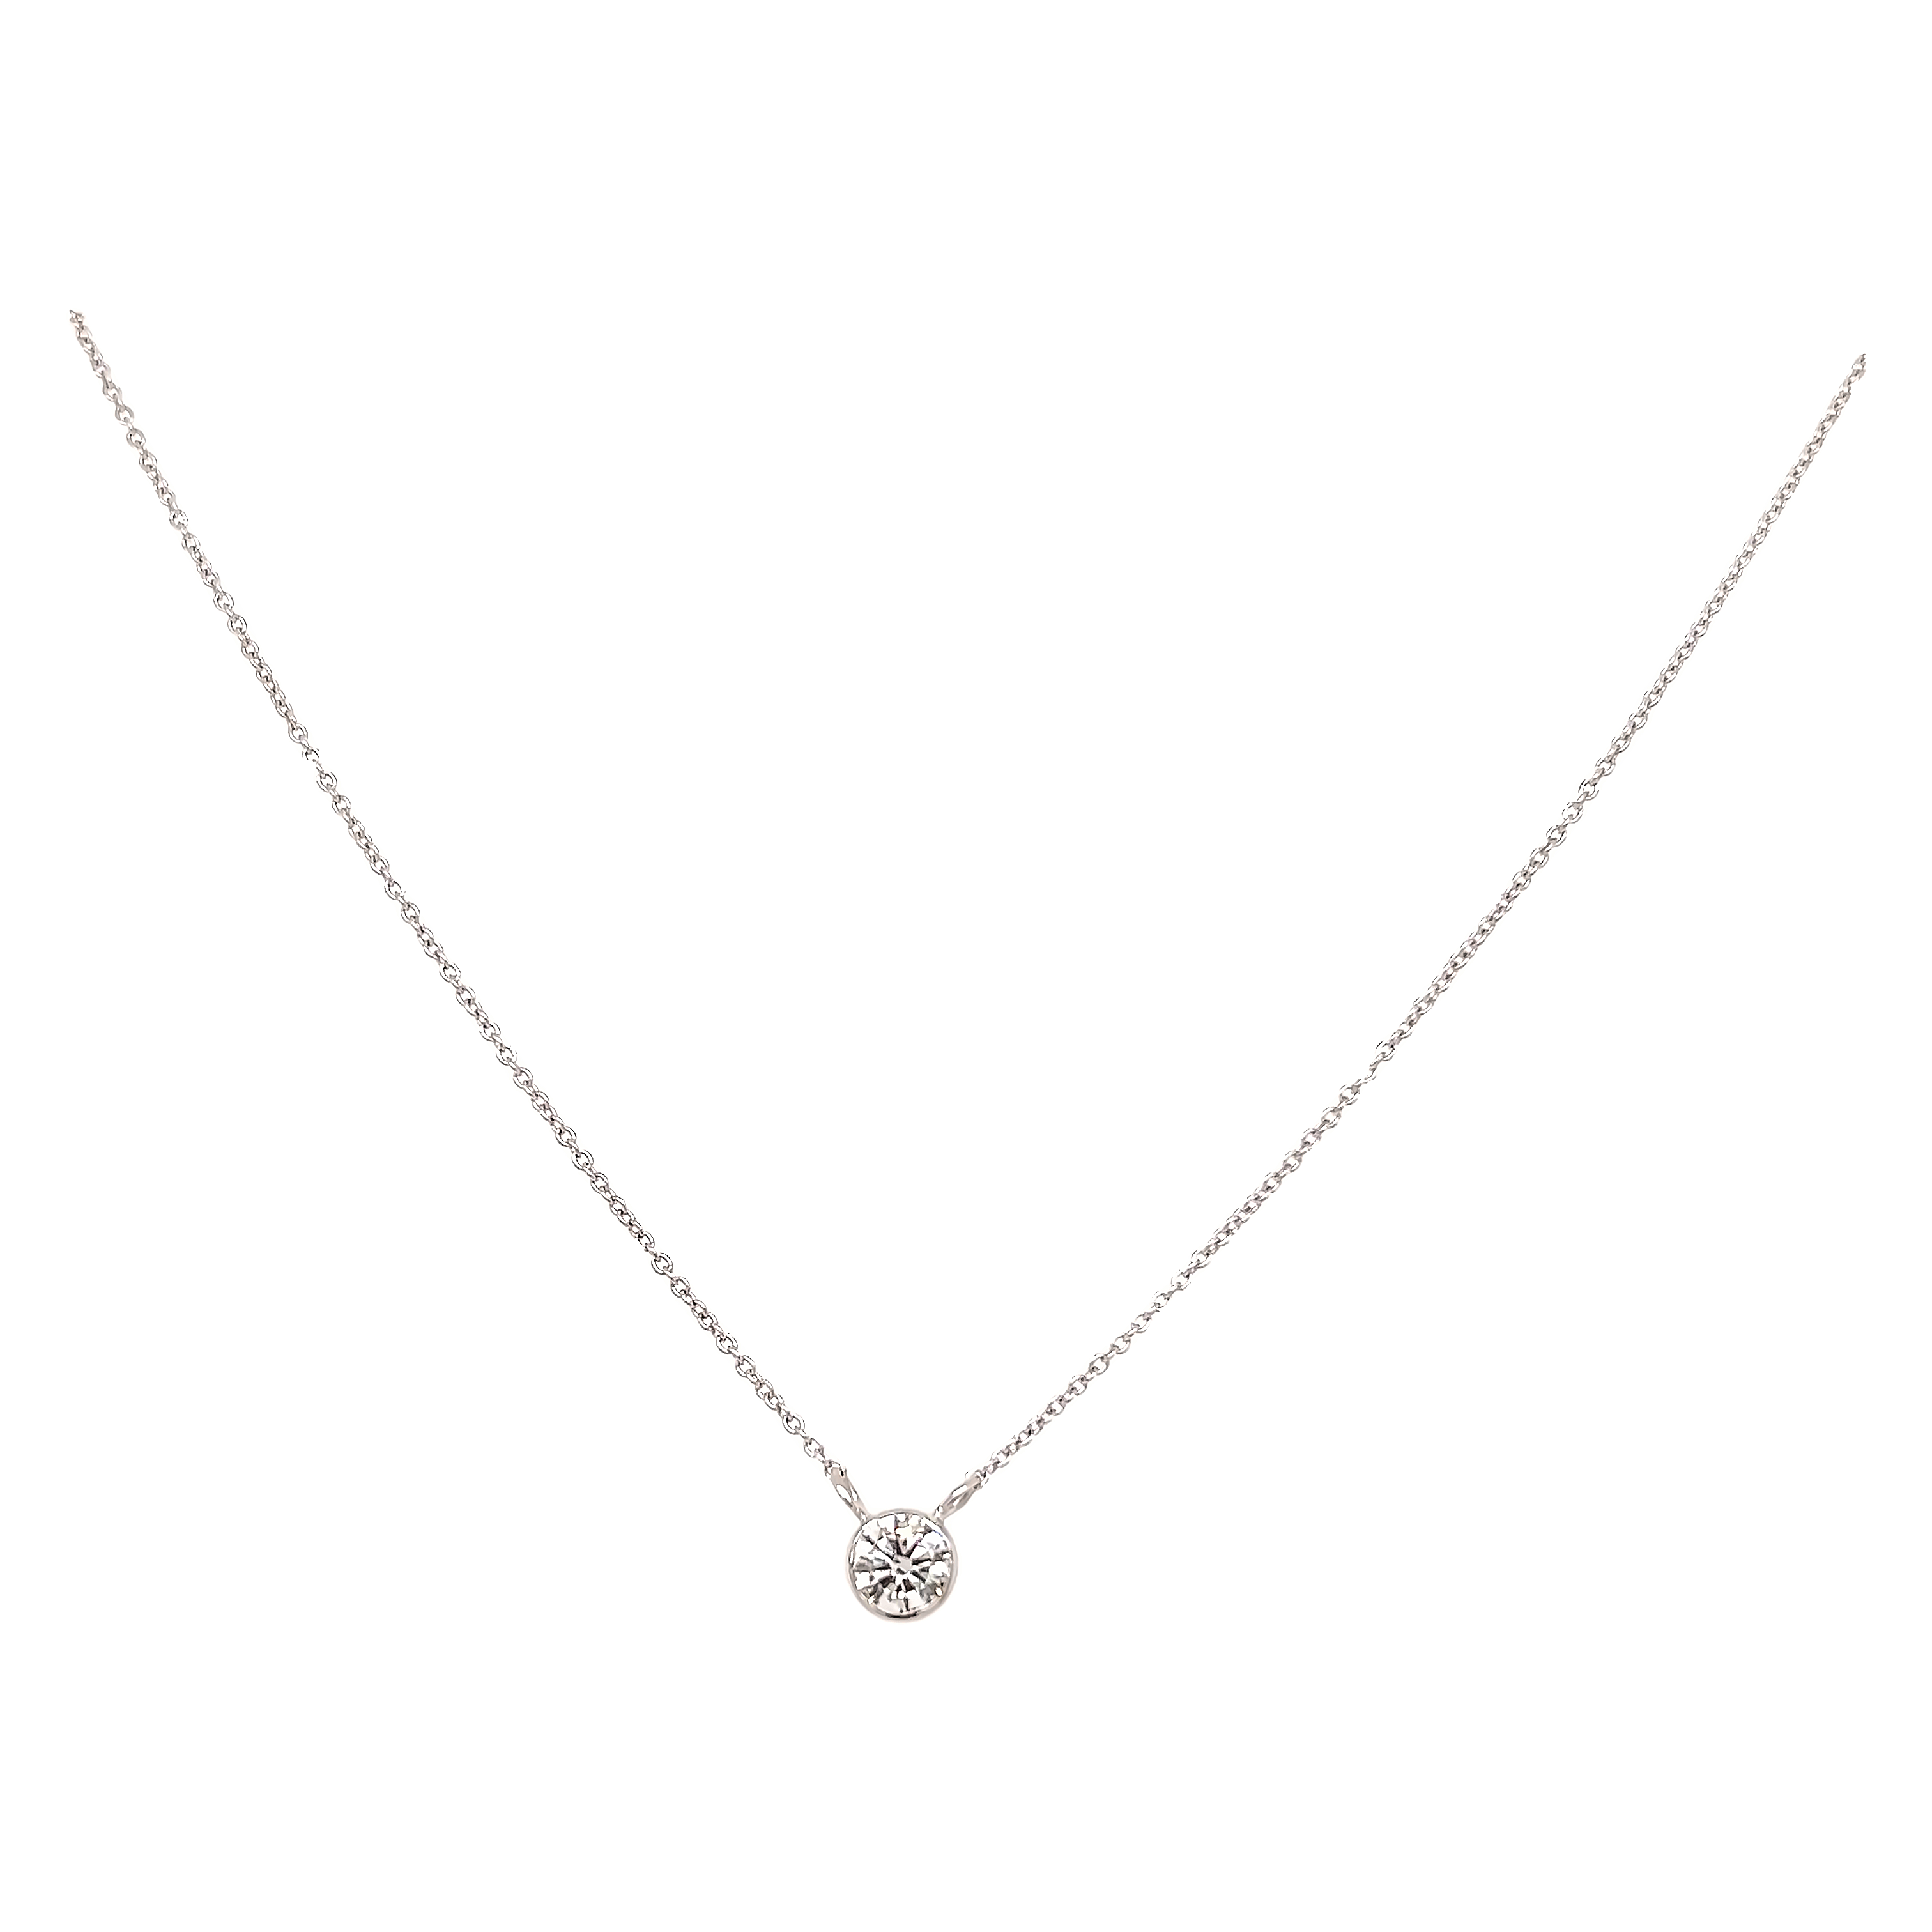 14 Karat white gold solitaire pendant Length 18 with One 0.30ct Round Brilliant G SI Diamond